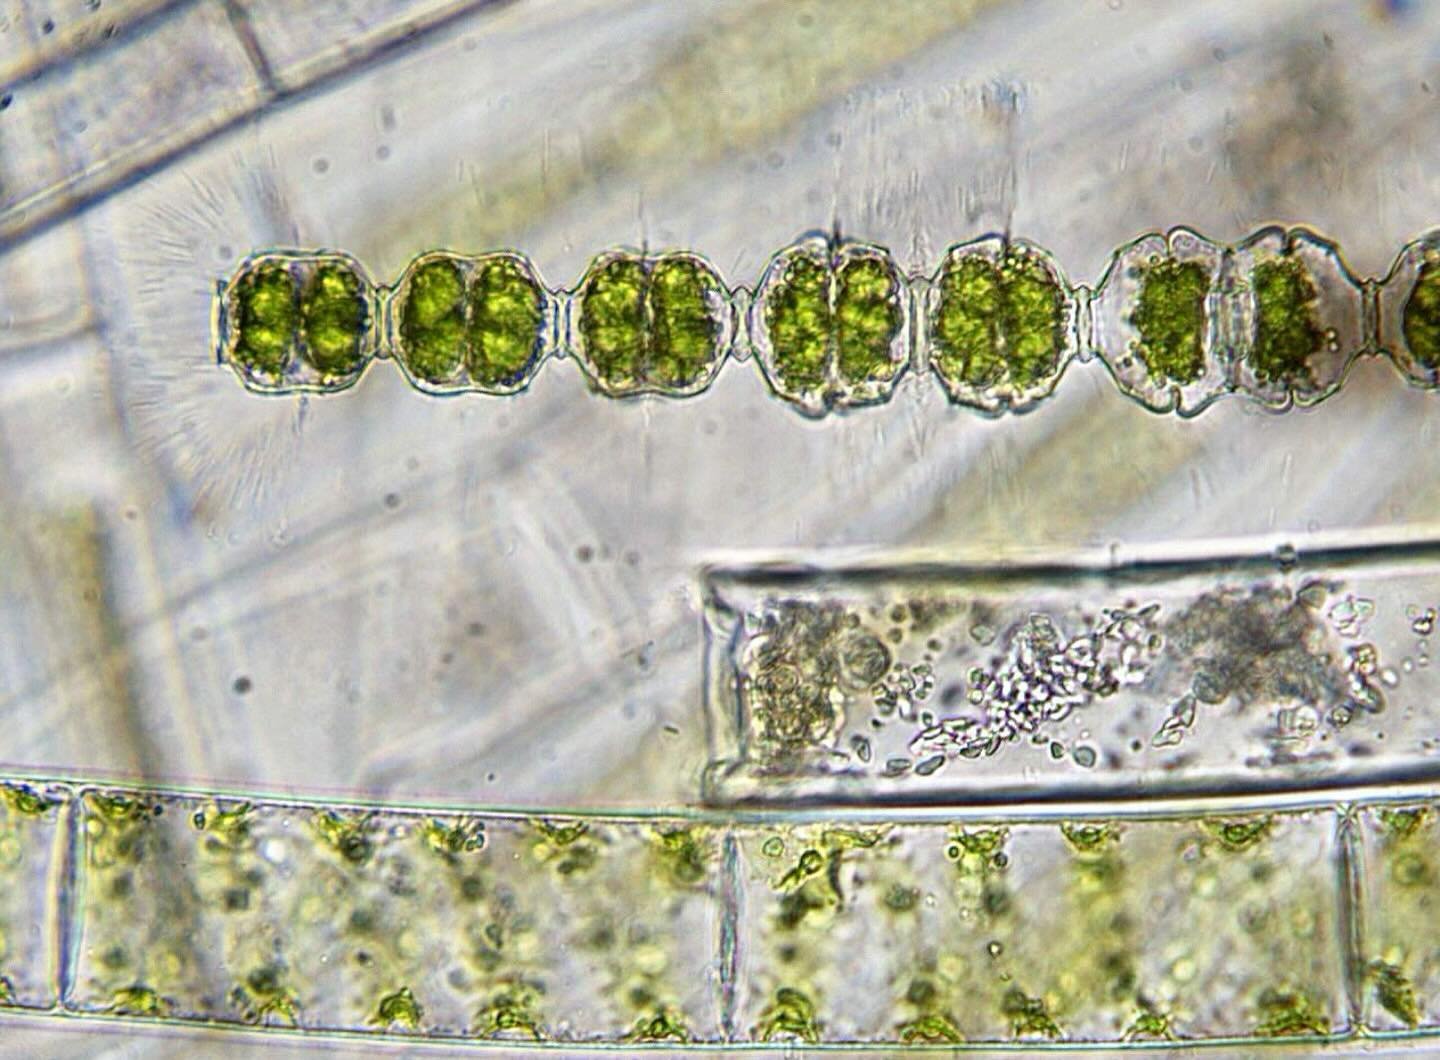 Filamentous green algae. 100x magnification. Brightfield.
.
I&rsquo;ll do another post in the future on complex multicellularity but here we have some good examples of algae with simple multicellularity. These cells exist as long filaments of many si